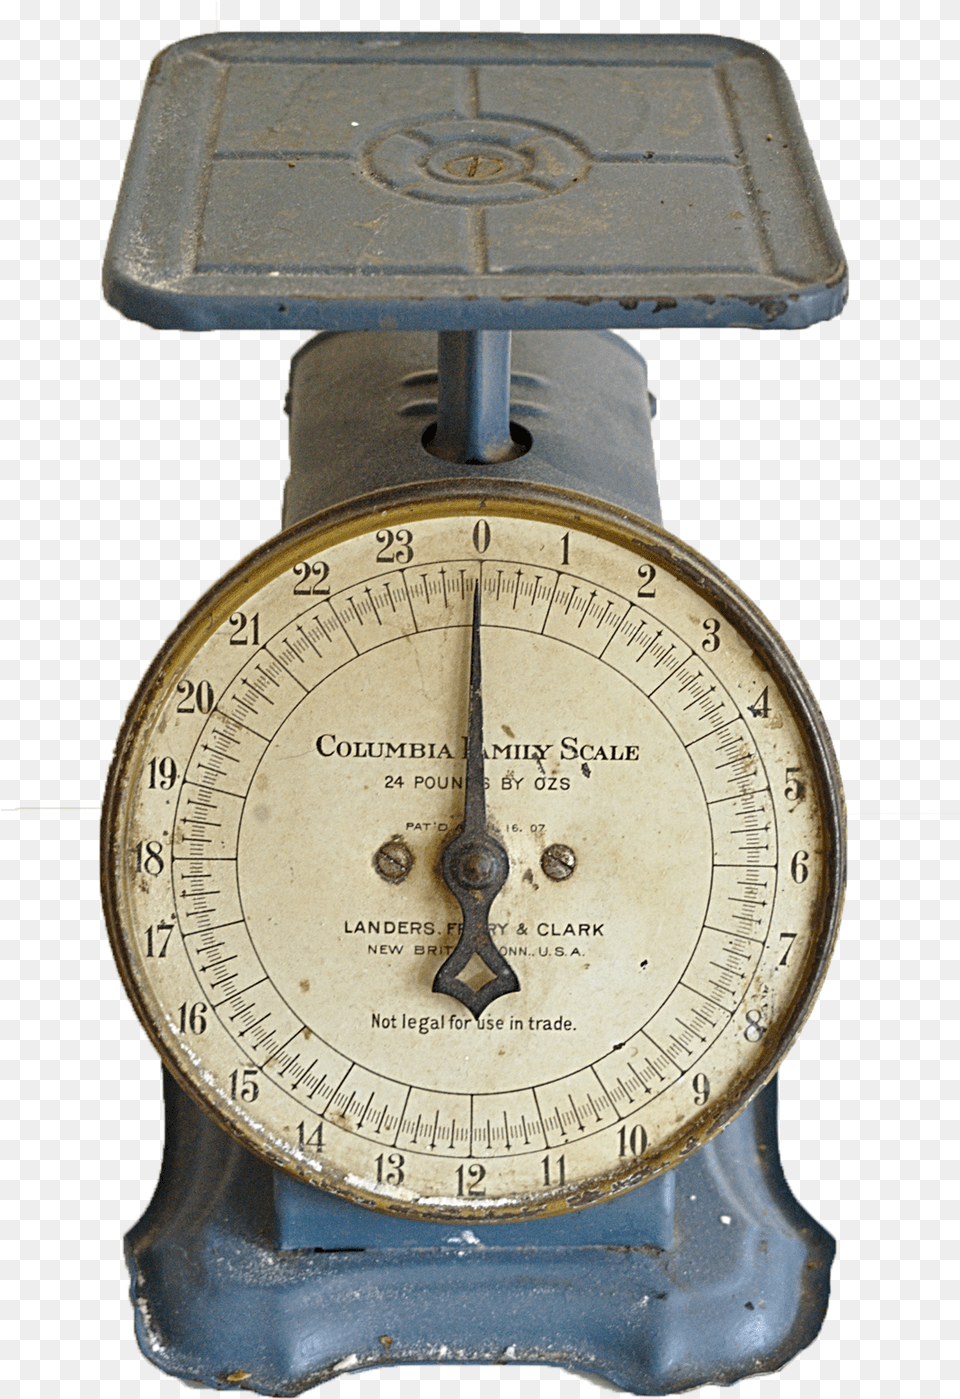 Weighing Balance Old Food Kitchen Scales, Scale, Wristwatch Png